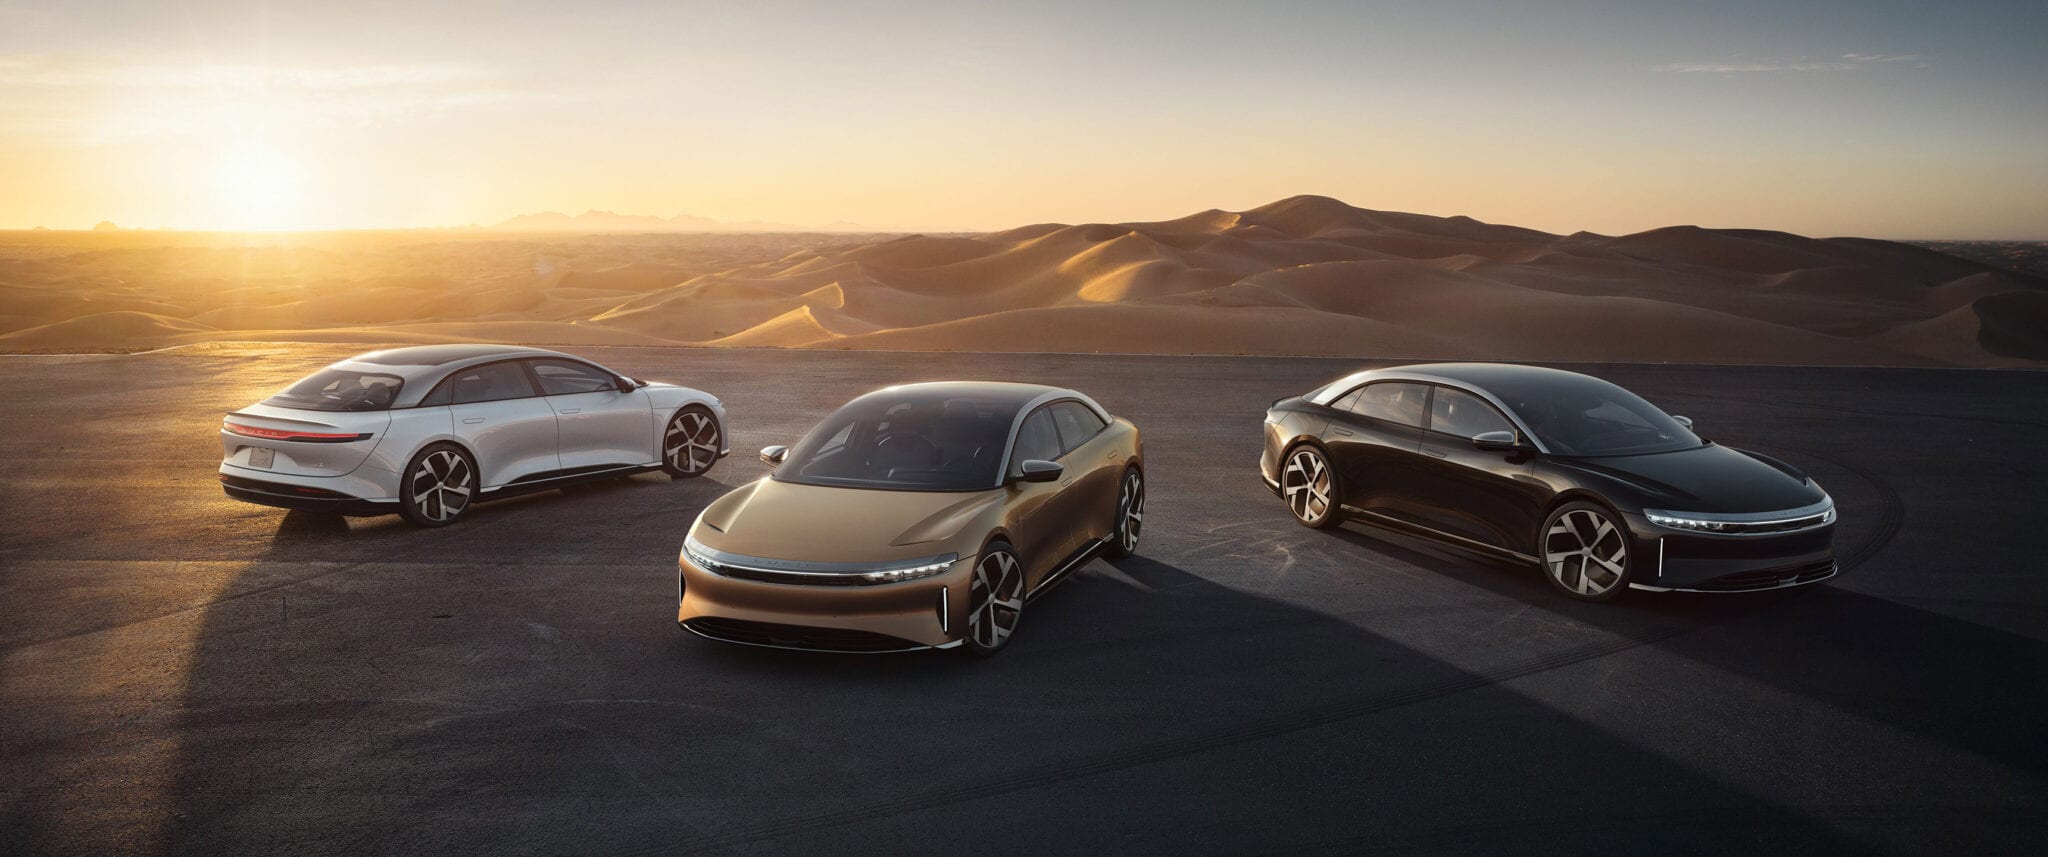 Lucid Air: The New Competitor in the EV Market